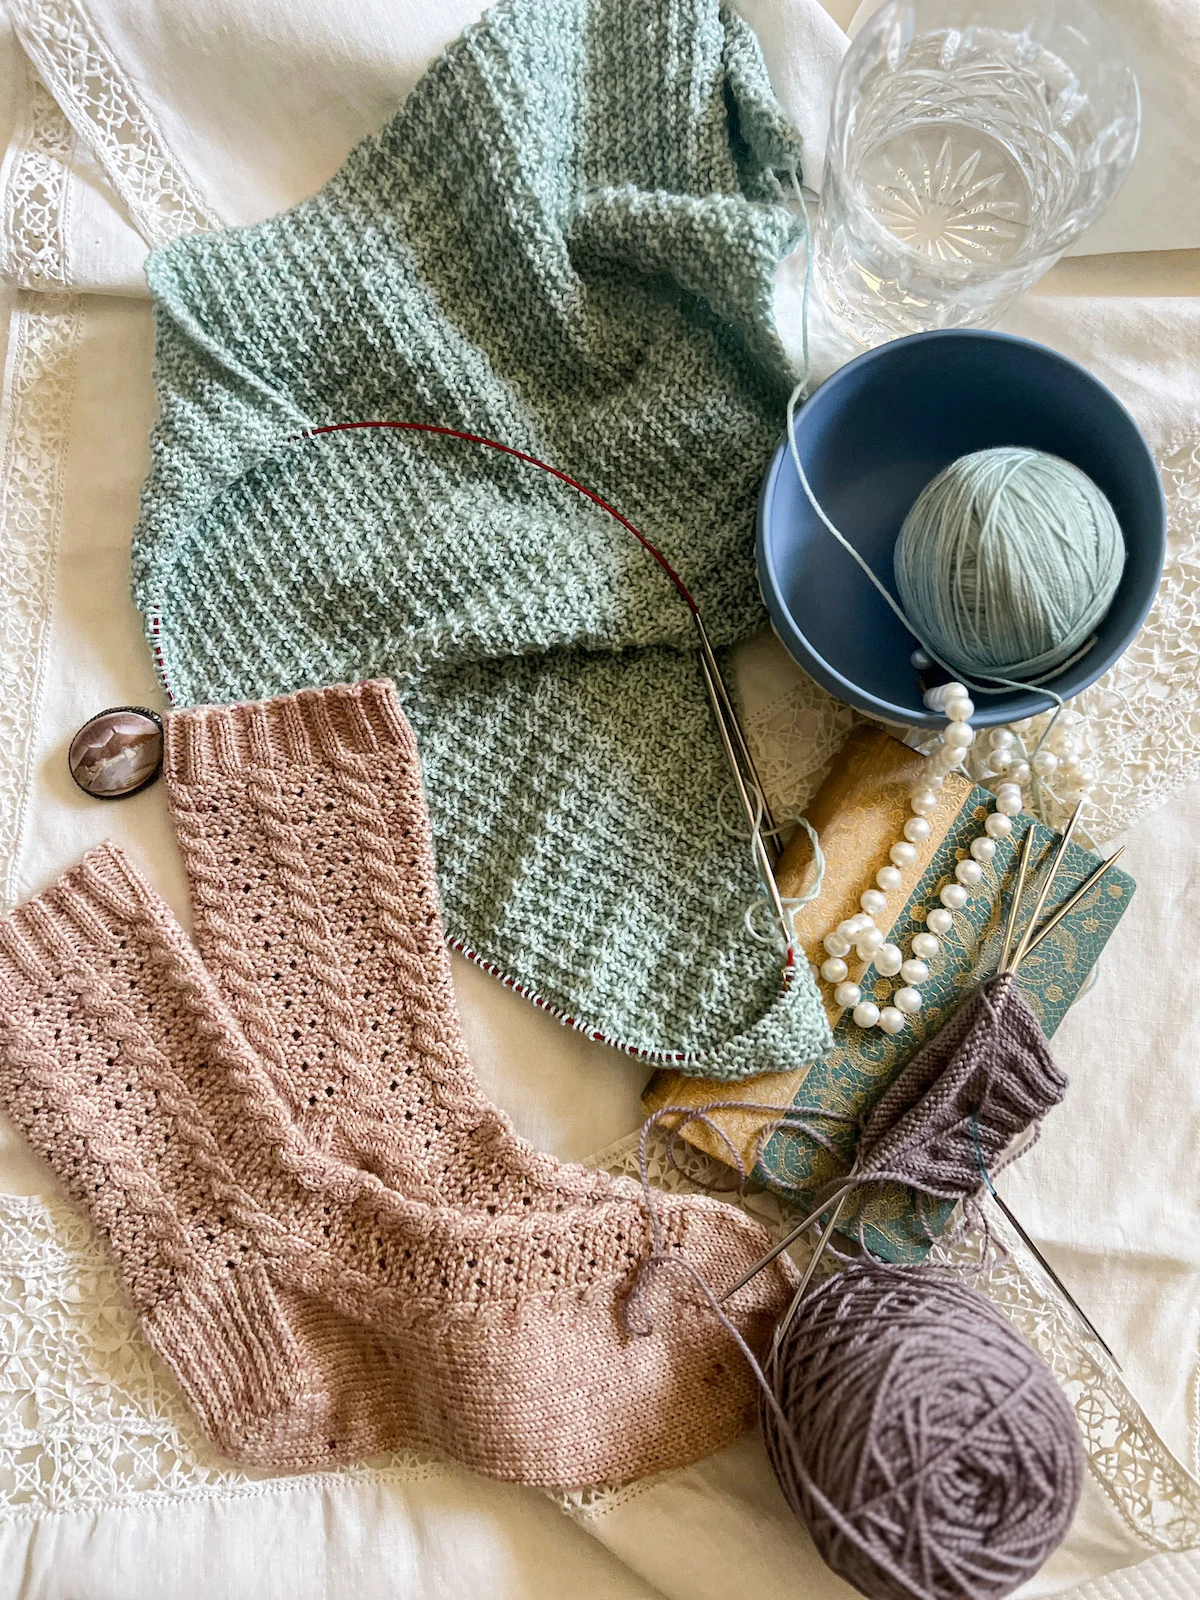 A flatlay photo of a seafoam green knit shawl in progress, a finished pair of pink knit socks, and a barely started pair of light purple knit socks laid out on an antique table cloth with thick lace trim. Also in the image is an antique book with a gold and turquoise cover, a light blue Wedgwood bowl holding a ball of seafoam green yarn, a string of pearls, a crystal glass filled with water (it's very hot today), and a small carved shell brooch.